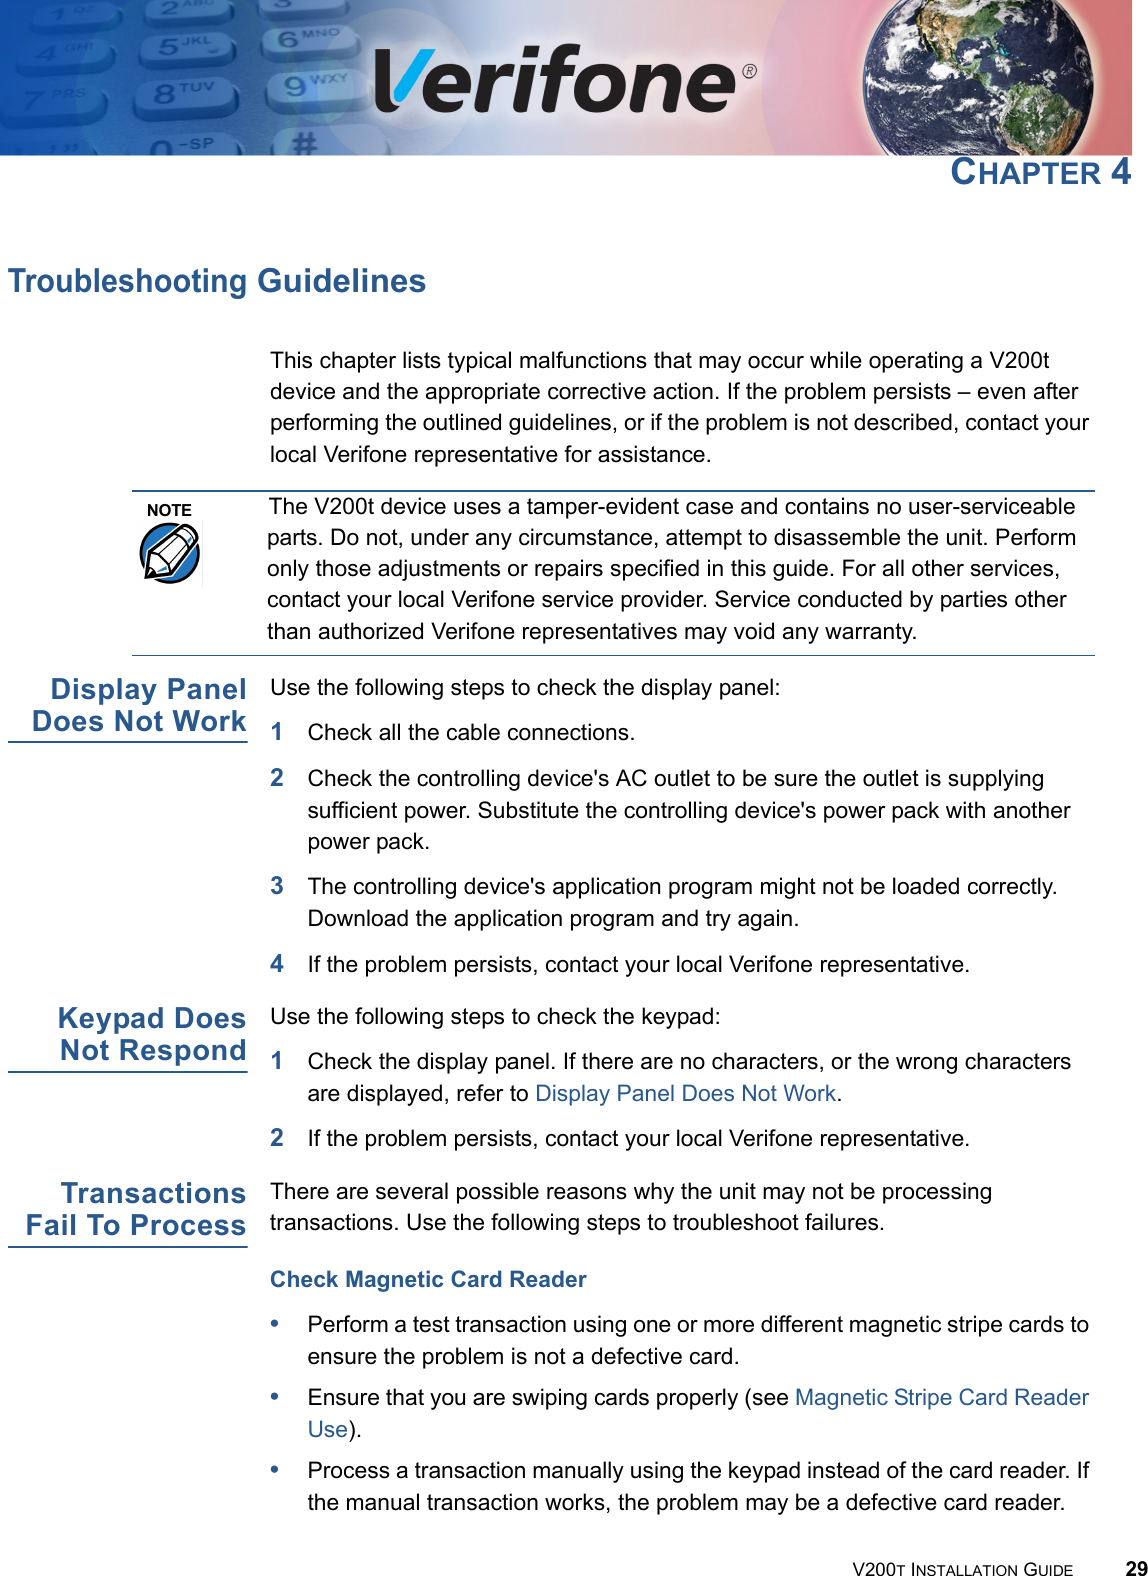 V200T INSTALLATION GUIDE 29CHAPTER 4Troubleshooting GuidelinesThis chapter lists typical malfunctions that may occur while operating a V200t device and the appropriate corrective action. If the problem persists – even after performing the outlined guidelines, or if the problem is not described, contact your local Verifone representative for assistance.Display PanelDoes Not WorkUse the following steps to check the display panel:1Check all the cable connections.2Check the controlling device&apos;s AC outlet to be sure the outlet is supplying sufficient power. Substitute the controlling device&apos;s power pack with another power pack.3The controlling device&apos;s application program might not be loaded correctly. Download the application program and try again.4If the problem persists, contact your local Verifone representative.Keypad DoesNot RespondUse the following steps to check the keypad:1Check the display panel. If there are no characters, or the wrong characters are displayed, refer to Display Panel Does Not Work.2If the problem persists, contact your local Verifone representative.TransactionsFail To ProcessThere are several possible reasons why the unit may not be processing transactions. Use the following steps to troubleshoot failures.Check Magnetic Card Reader•Perform a test transaction using one or more different magnetic stripe cards to ensure the problem is not a defective card.•Ensure that you are swiping cards properly (see Magnetic Stripe Card Reader Use).•Process a transaction manually using the keypad instead of the card reader. If the manual transaction works, the problem may be a defective card reader.NOTEThe V200t device uses a tamper-evident case and contains no user-serviceable parts. Do not, under any circumstance, attempt to disassemble the unit. Perform only those adjustments or repairs specified in this guide. For all other services, contact your local Verifone service provider. Service conducted by parties other than authorized Verifone representatives may void any warranty.